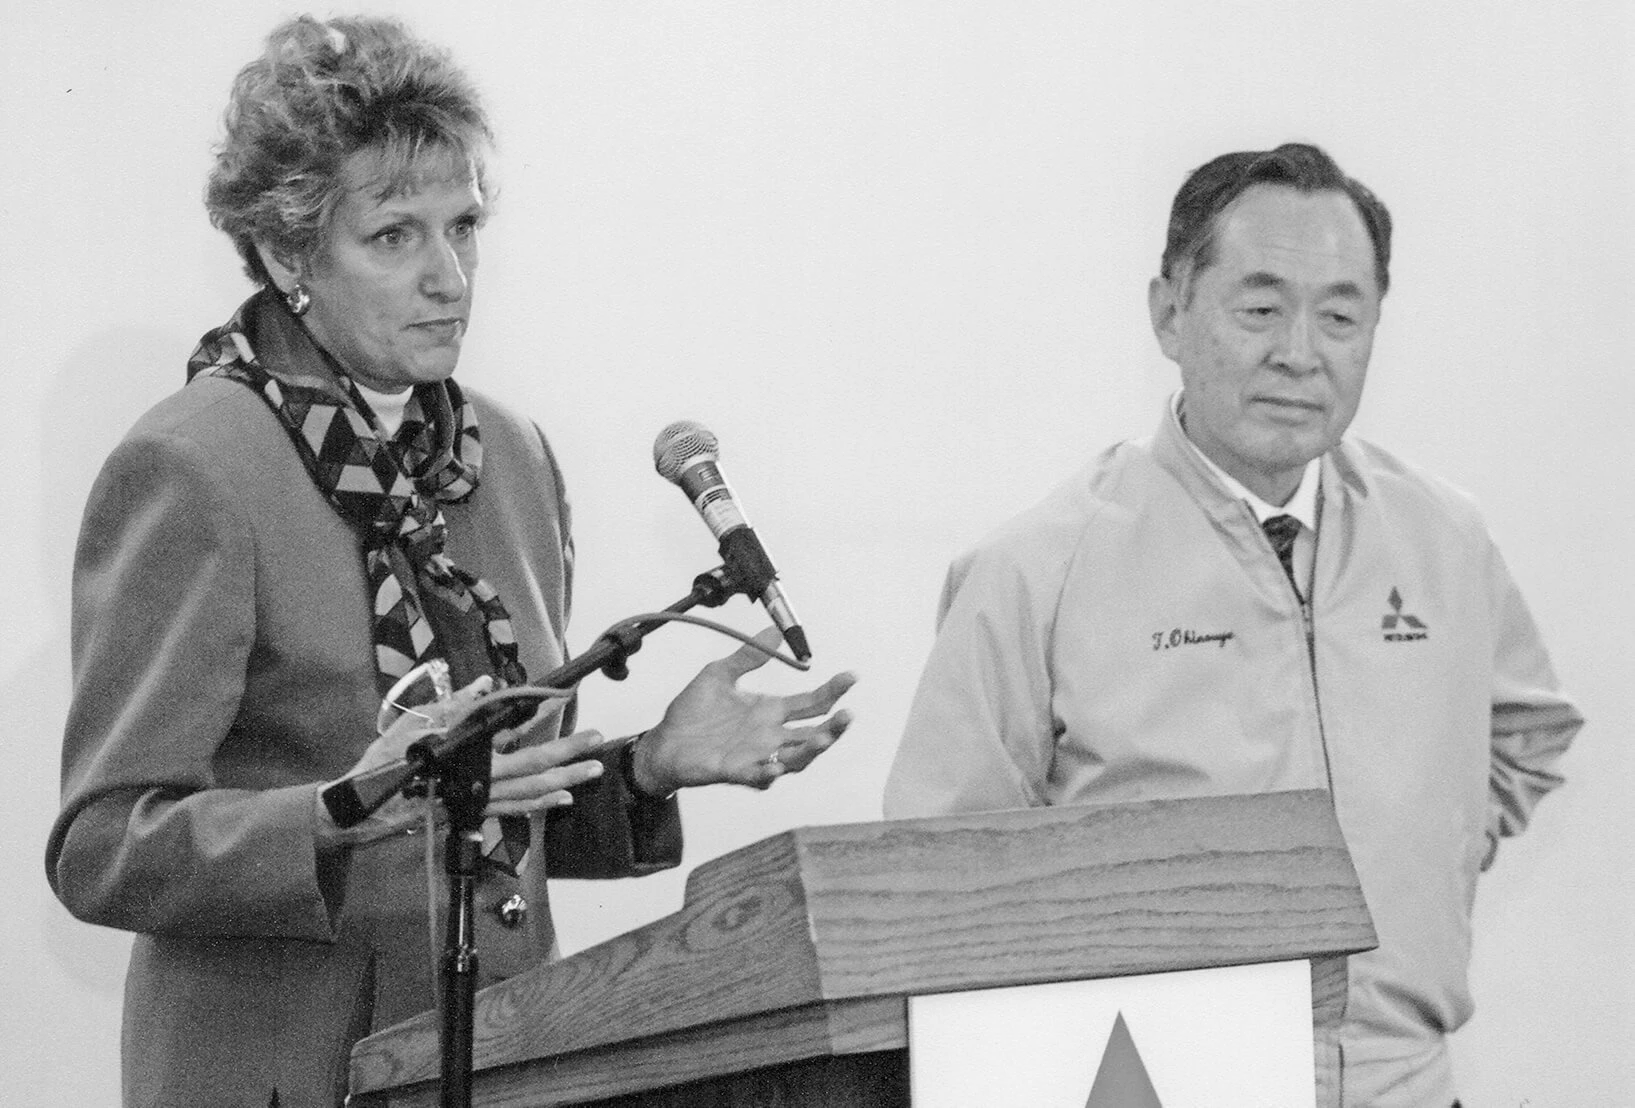 A white woman wearing a neck scarf, earrings, and short hair speaks at a podium. Next to her is a Japanese man wearing a Mitsubishi zip-up jacket, white shirt and tie.